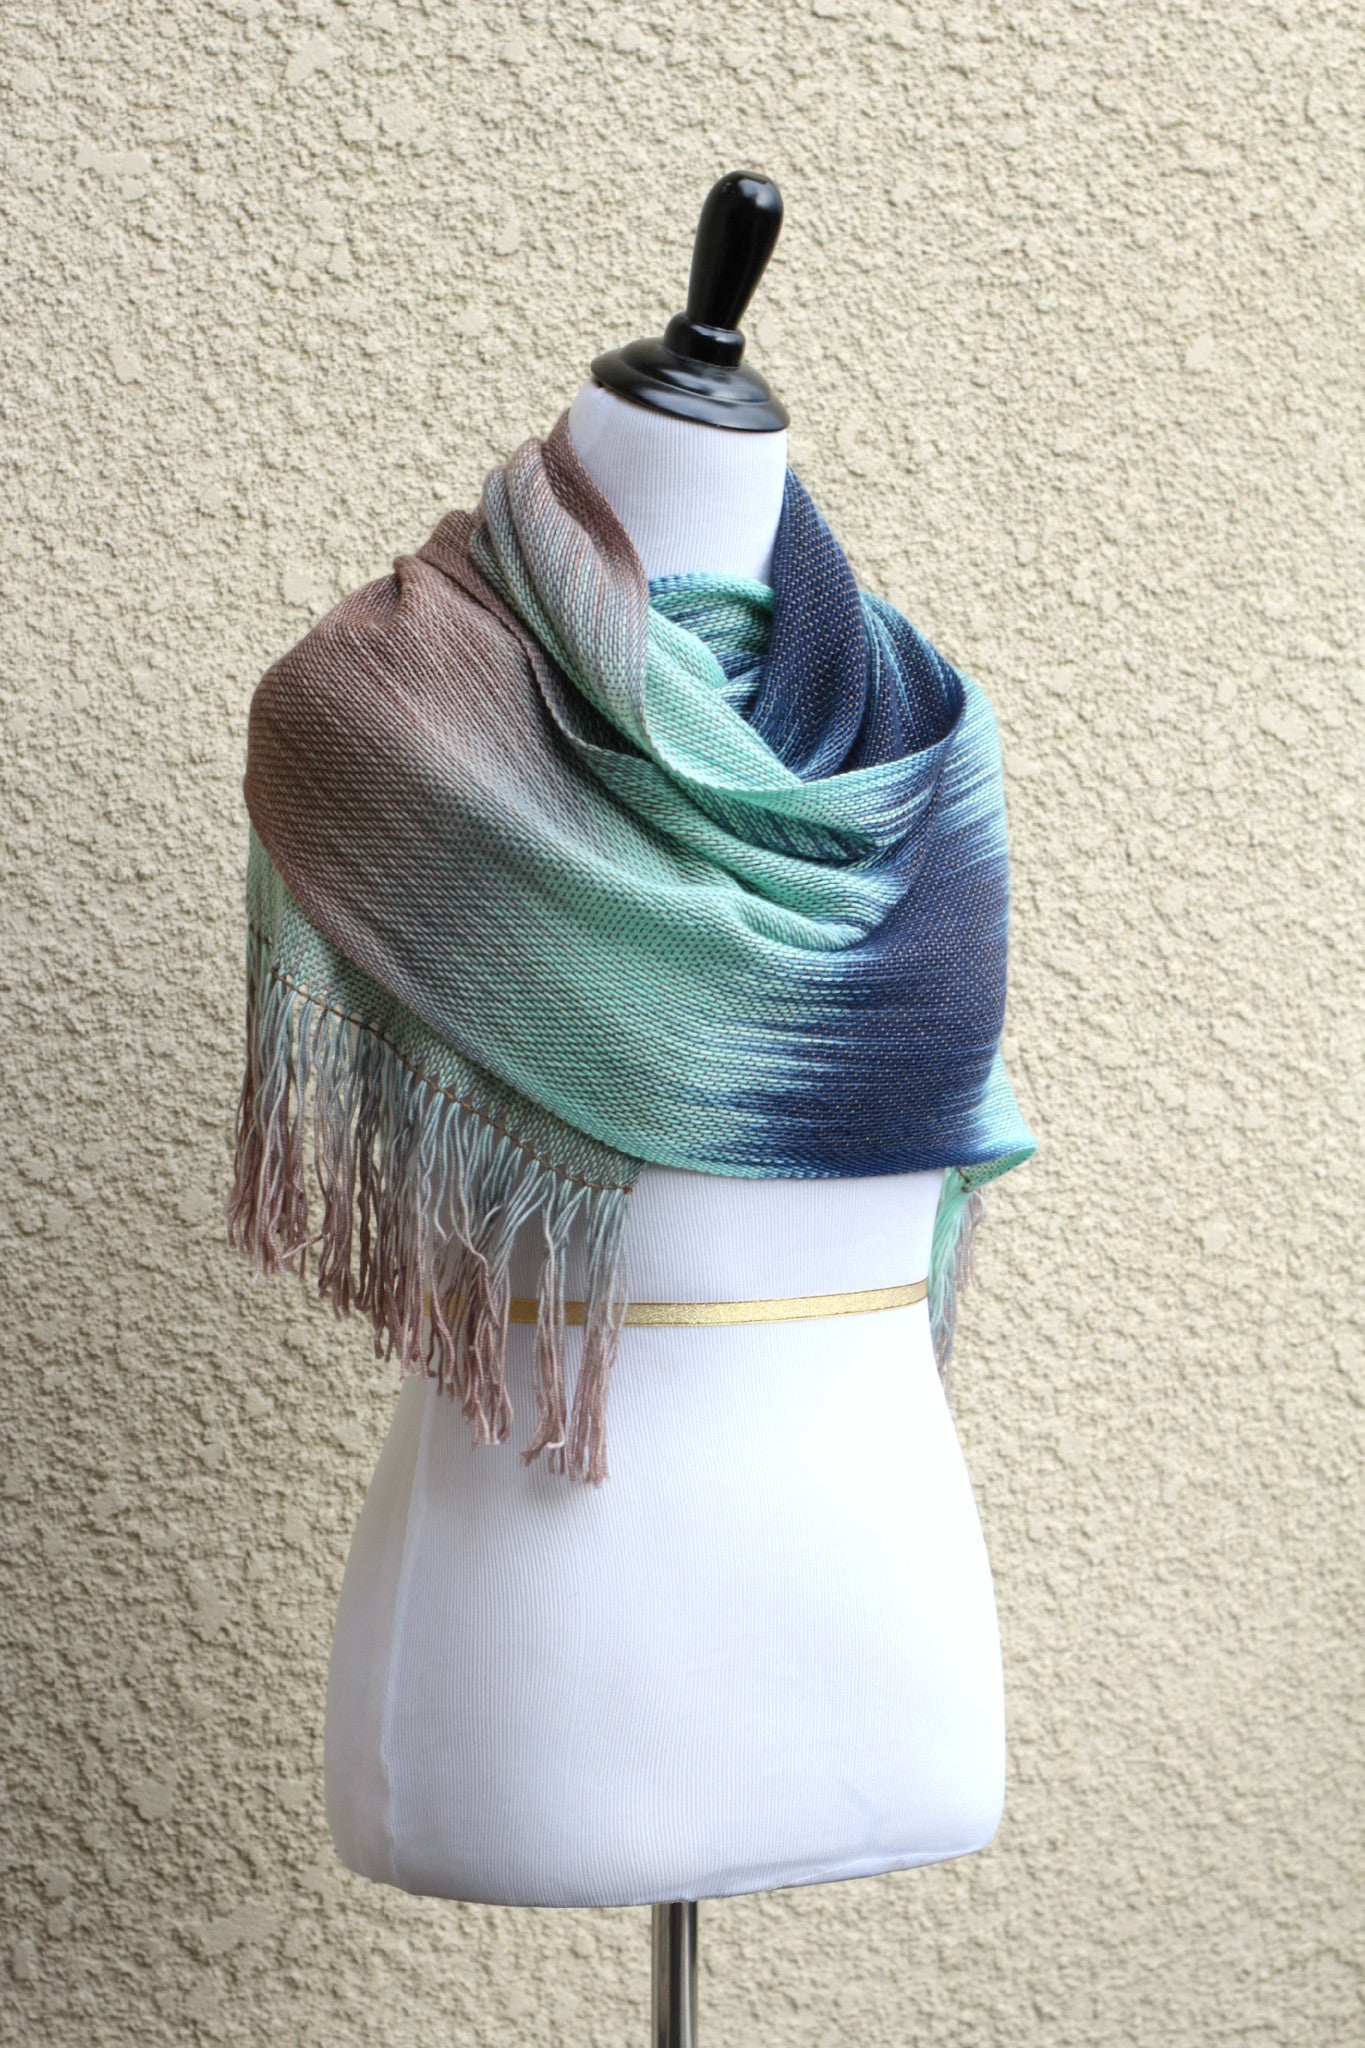 Woven scarf in mint, beige and blue colors